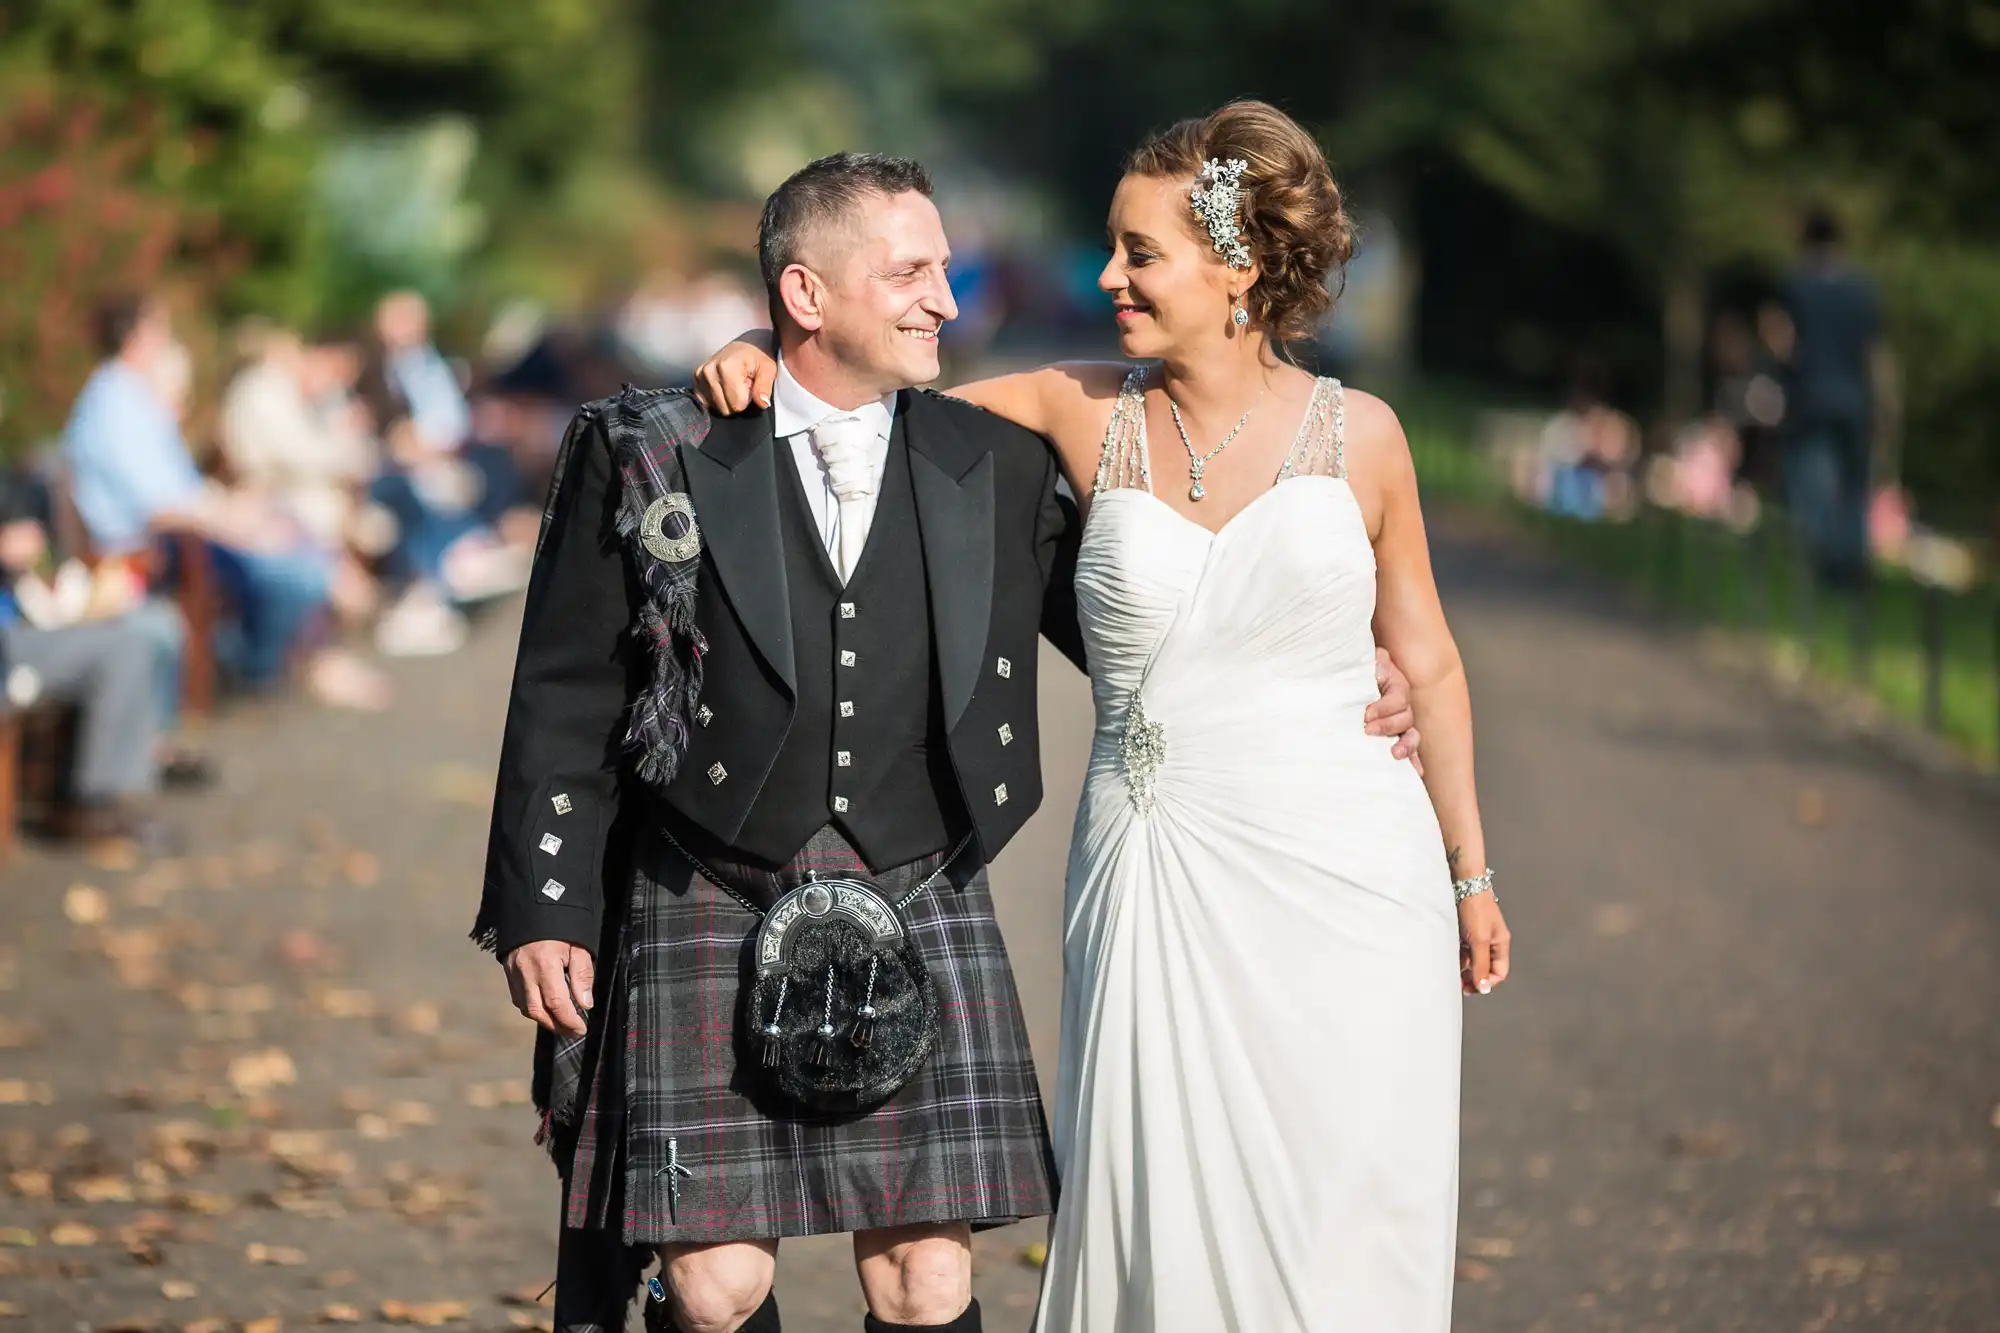 A newlywed couple joyfully walking in a park, with the man in a traditional kilt and the woman in a white wedding gown.